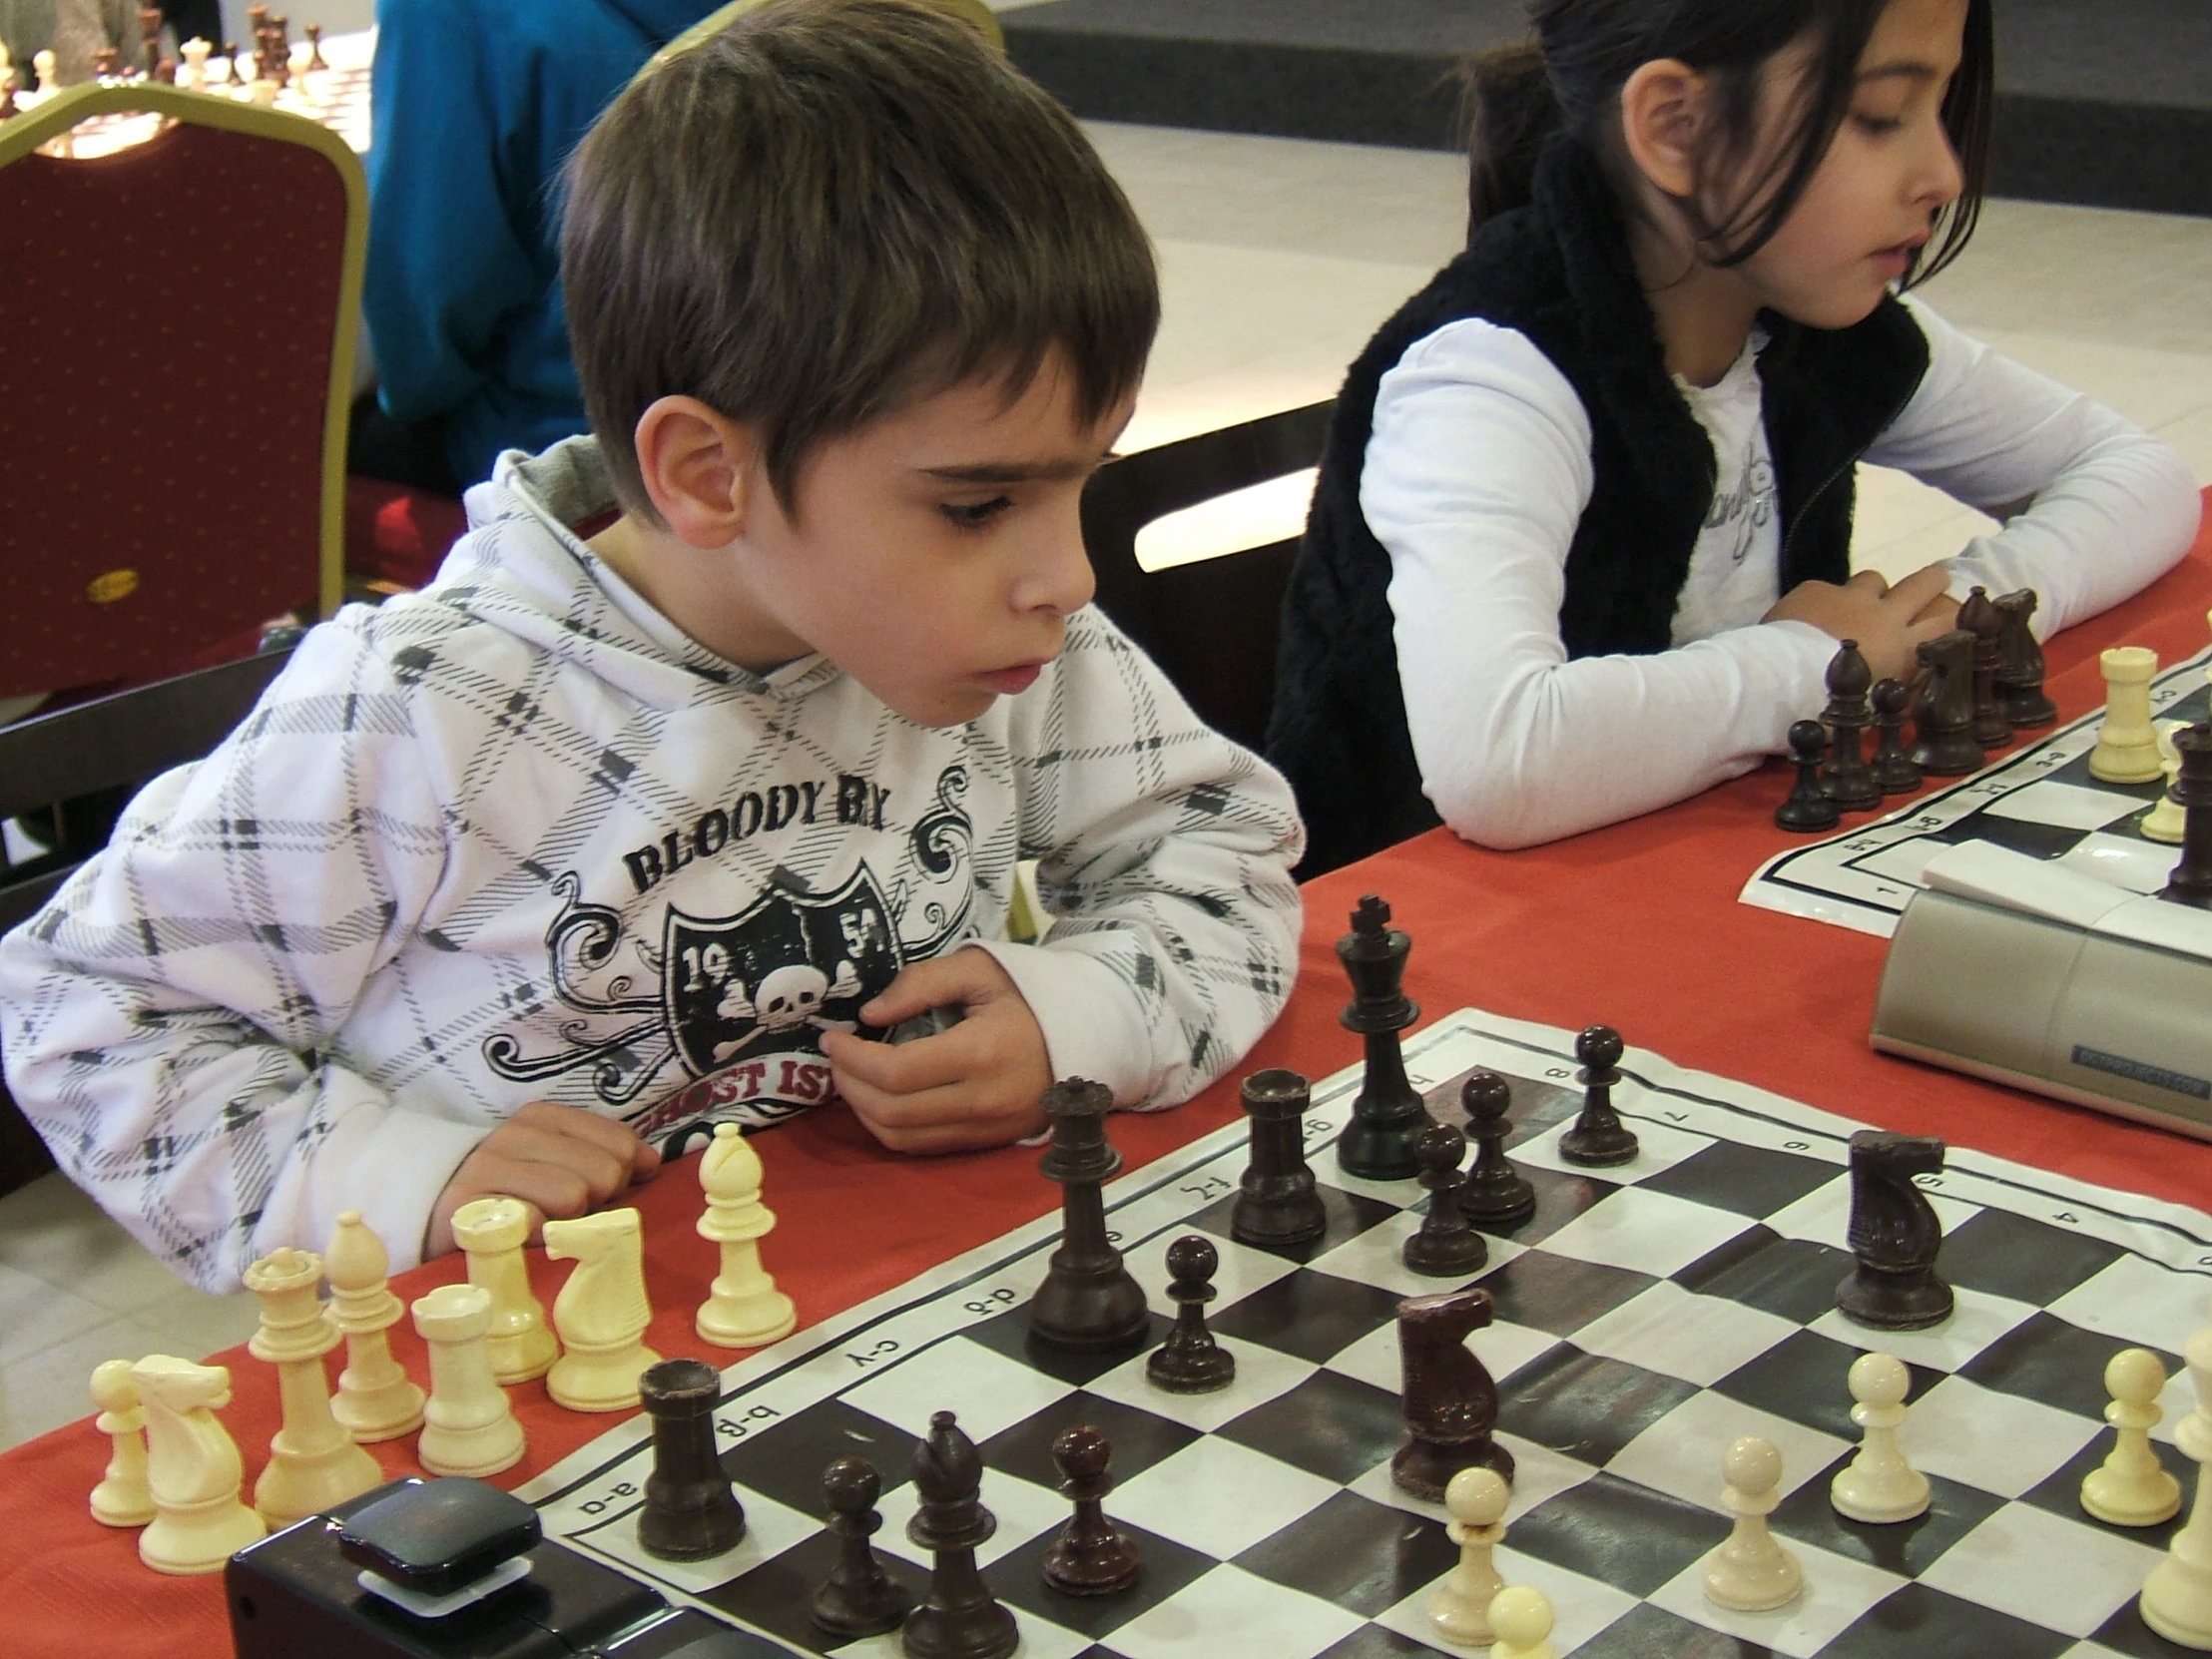 two children playing chess at a table with red cloth